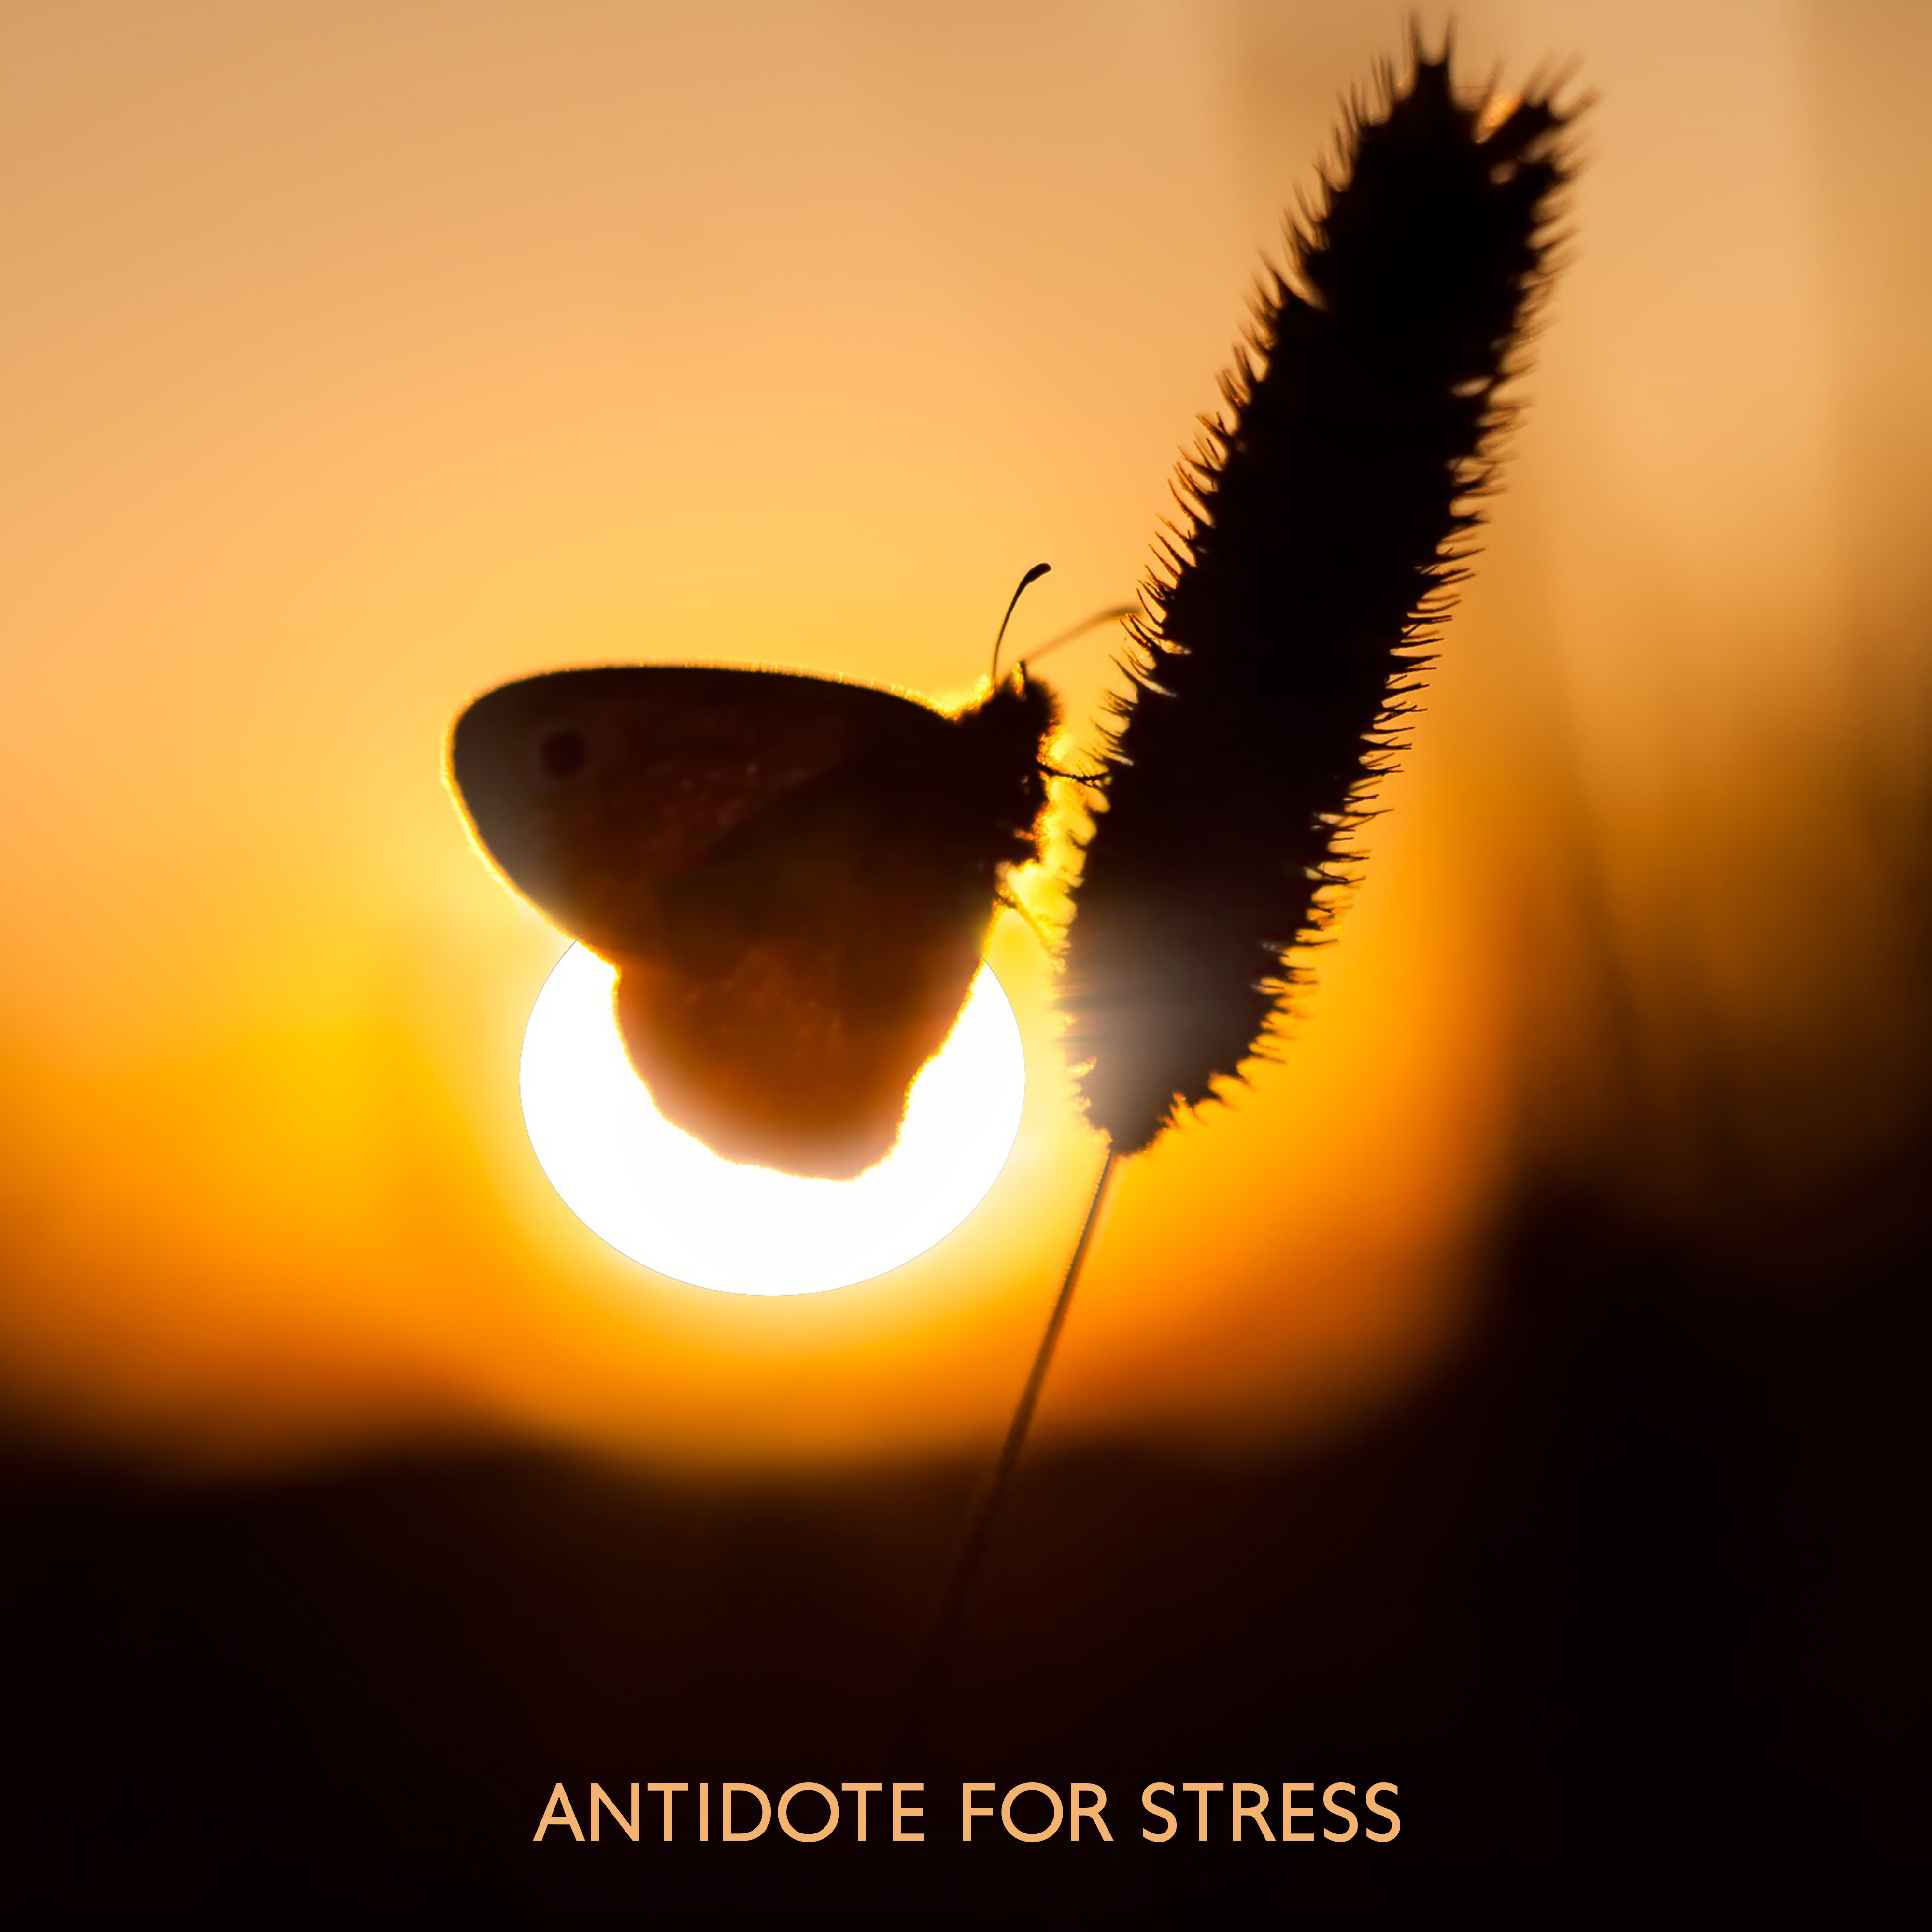 Antidote for Stress: Music and Nature in the Fight against Stress, Tension and Nervousness (Soothing Melodies of Nature to Relax, Sleep, Rest, Nap, Relax and Calm Down)